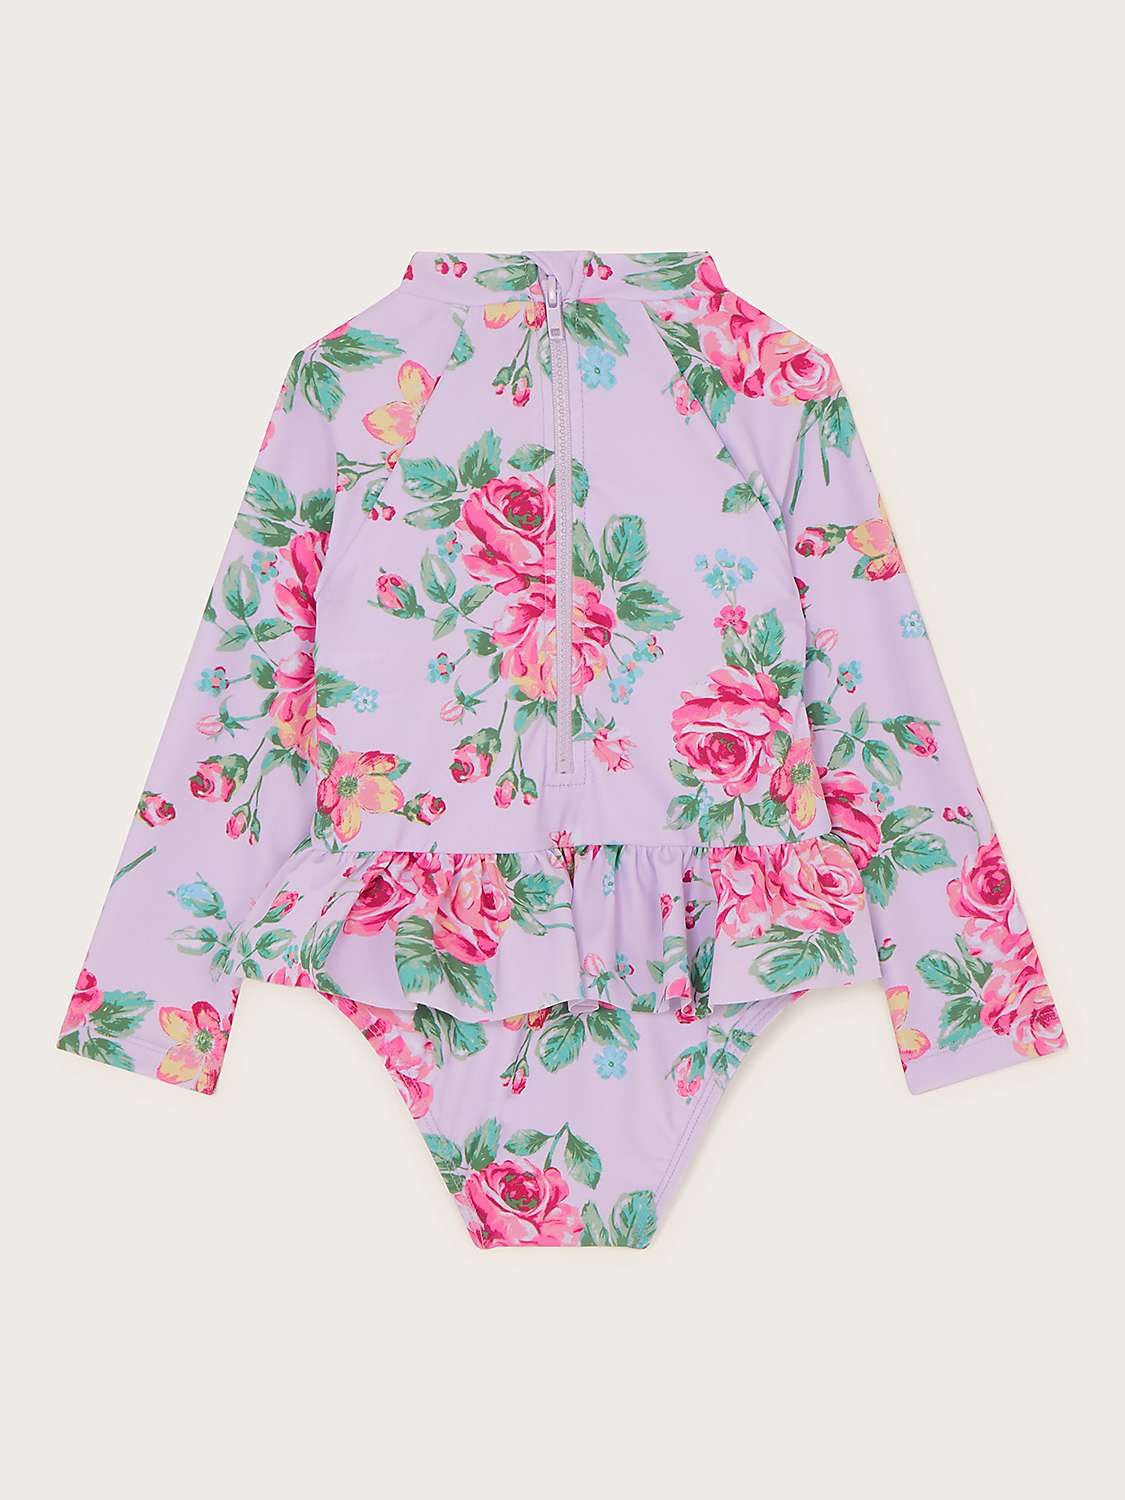 Buy Monsoon Baby Floral Print Skirted Swimsuit, Lilac Online at johnlewis.com